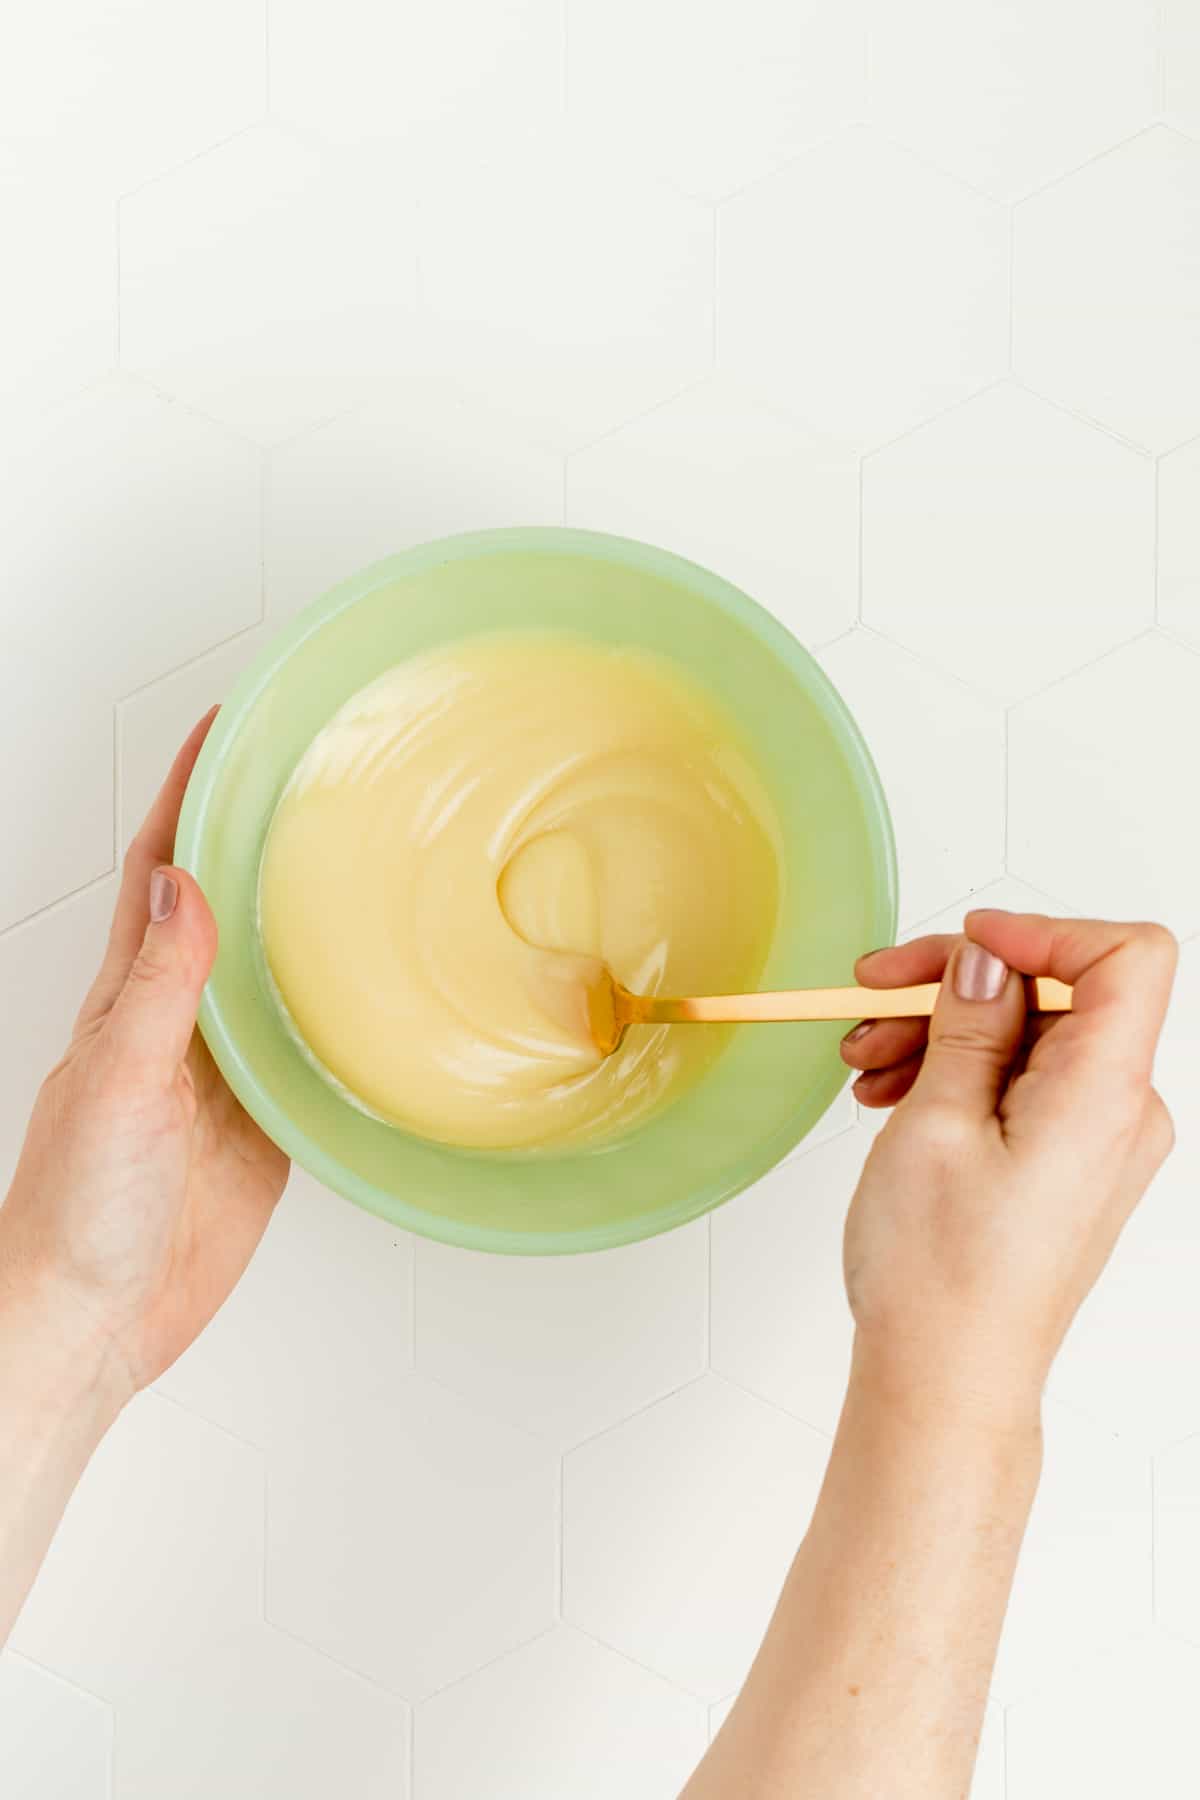 Hand holding green mixing bowl and stirring white chocolate sauce with gold fork.